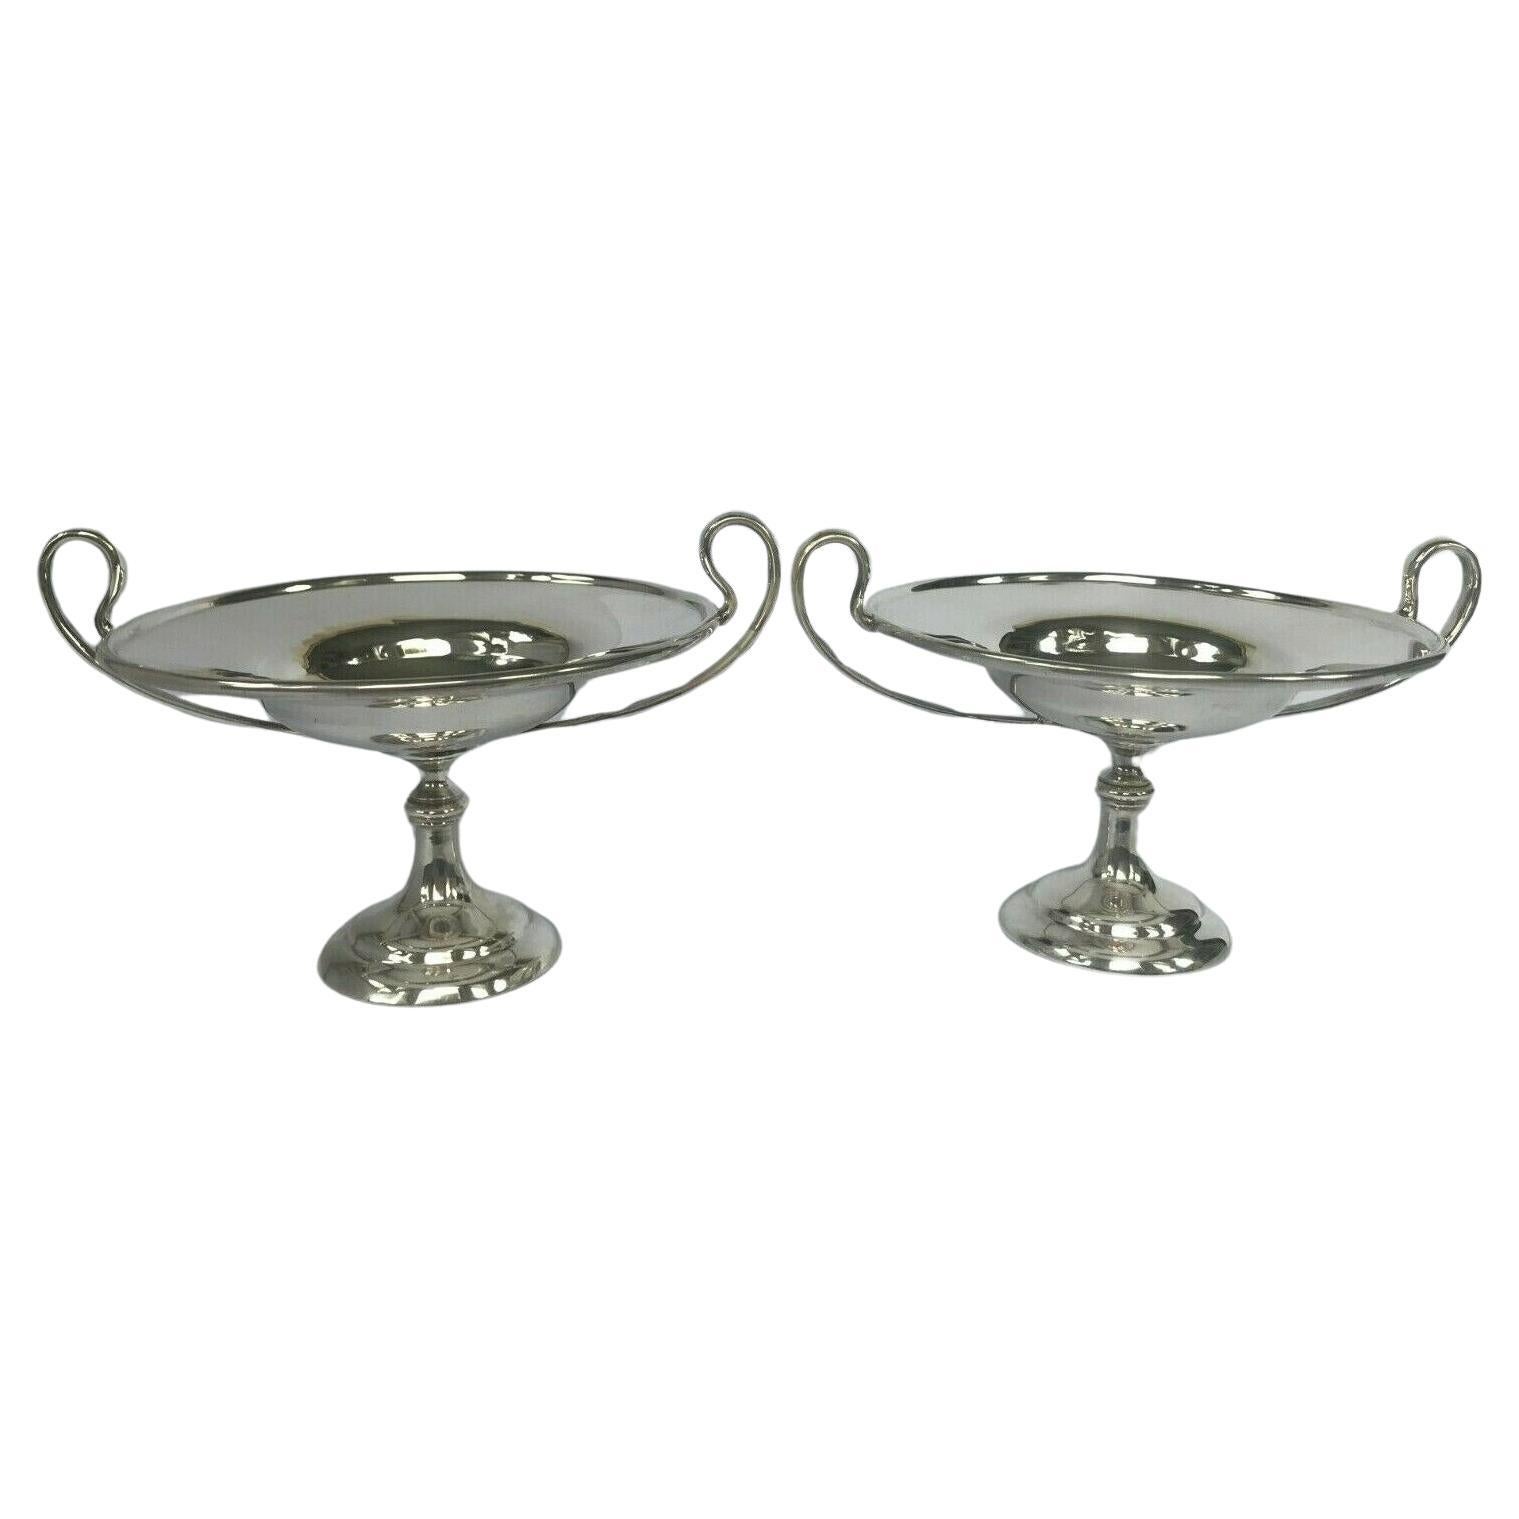 Pair of Sterling Silver Bonbon Dishes by Holland, Aldwinckle & Slater, 1903 For Sale